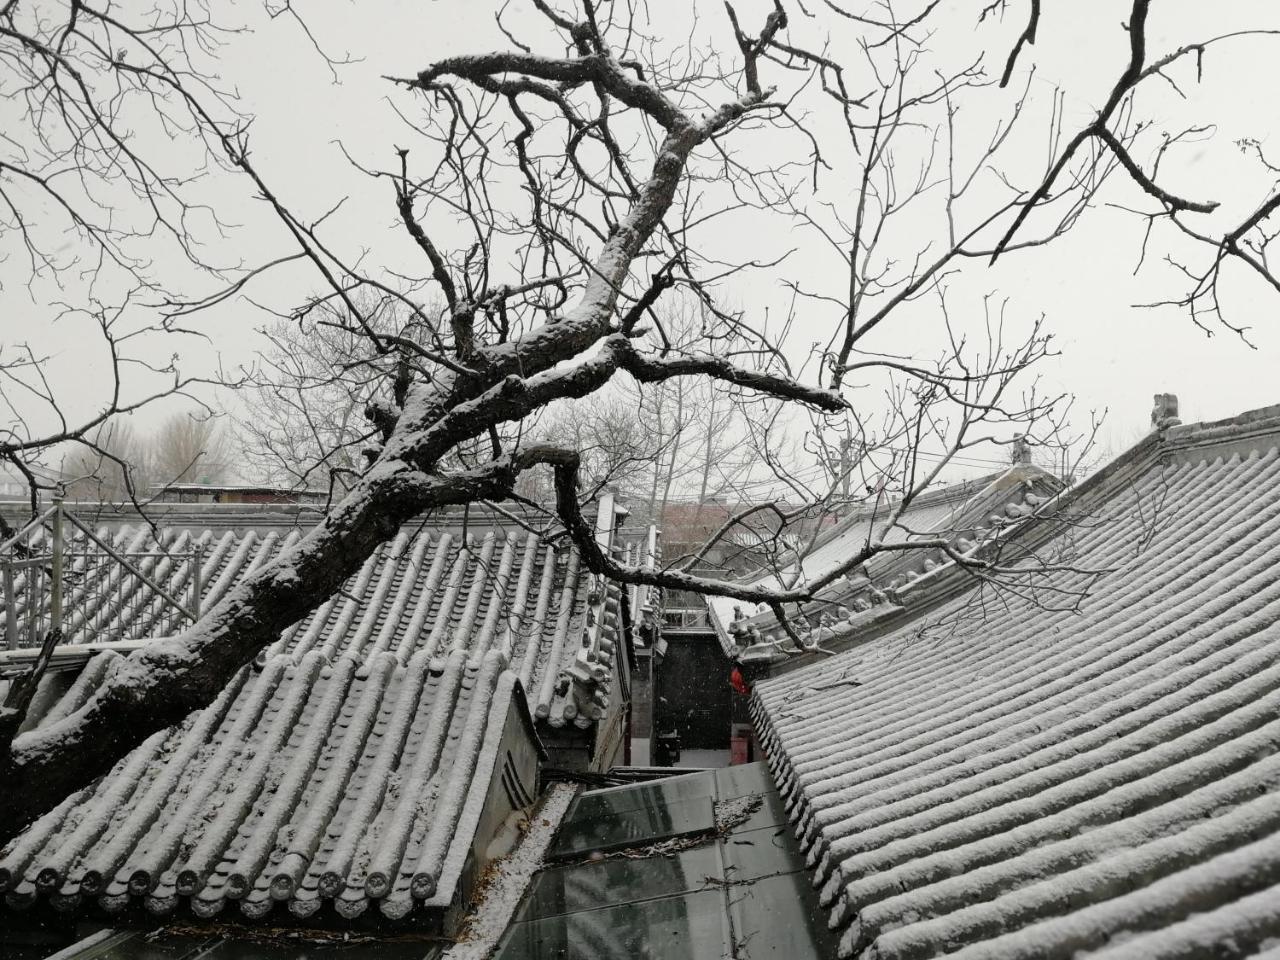 Beijing Fly By Knight Courtyard Hotel Exterior foto